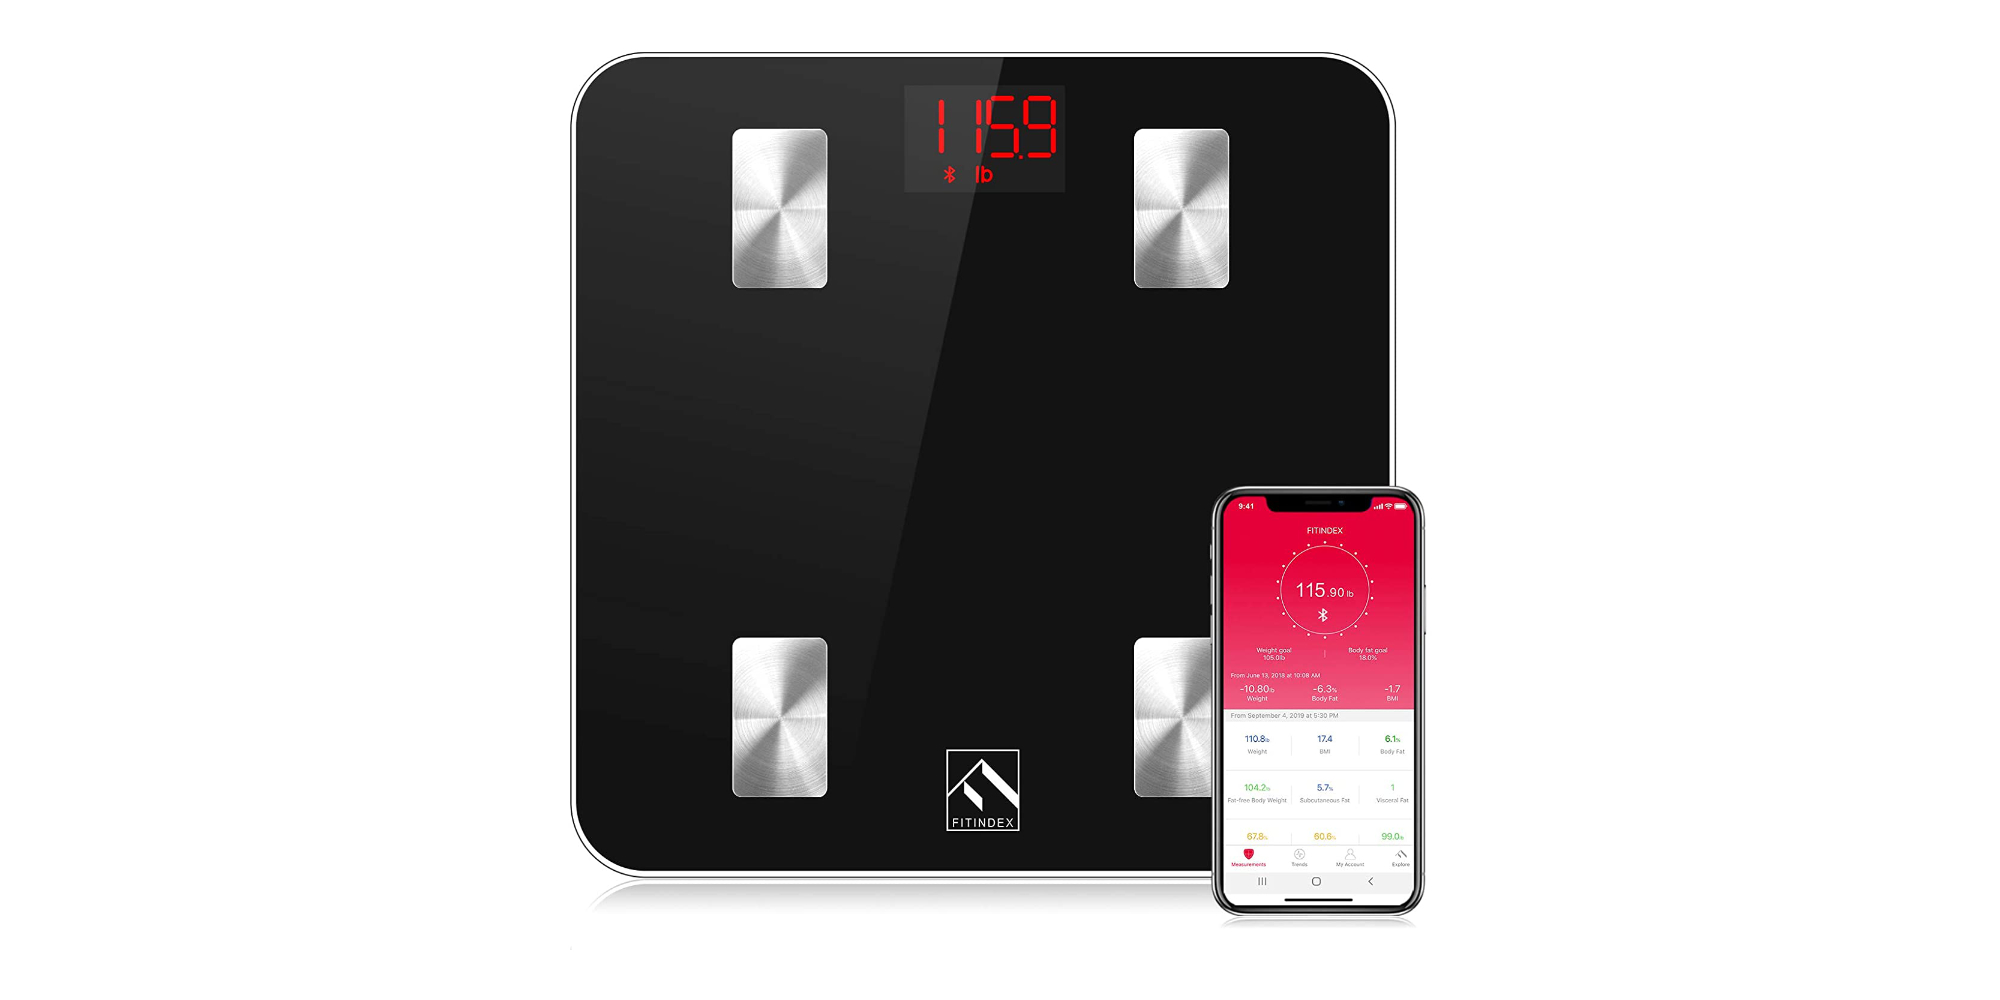 https://9to5toys.com/wp-content/uploads/sites/5/2021/02/FITINDEX-Smart-Body-Fat-Scale-1.jpg